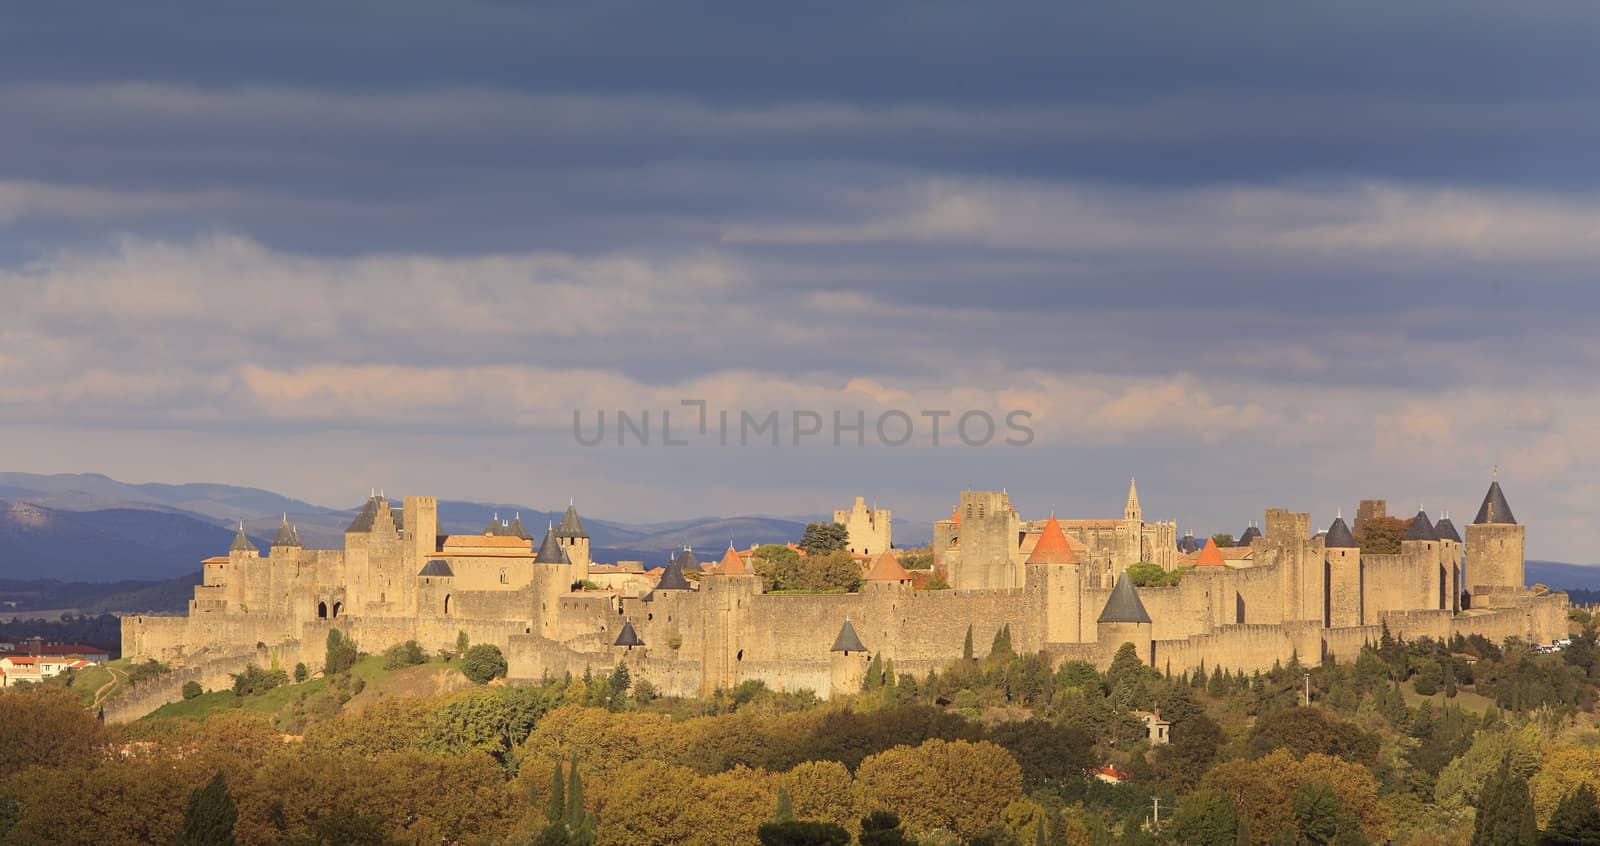 Dusk image of the famous fortified town of Carcassonne, France.